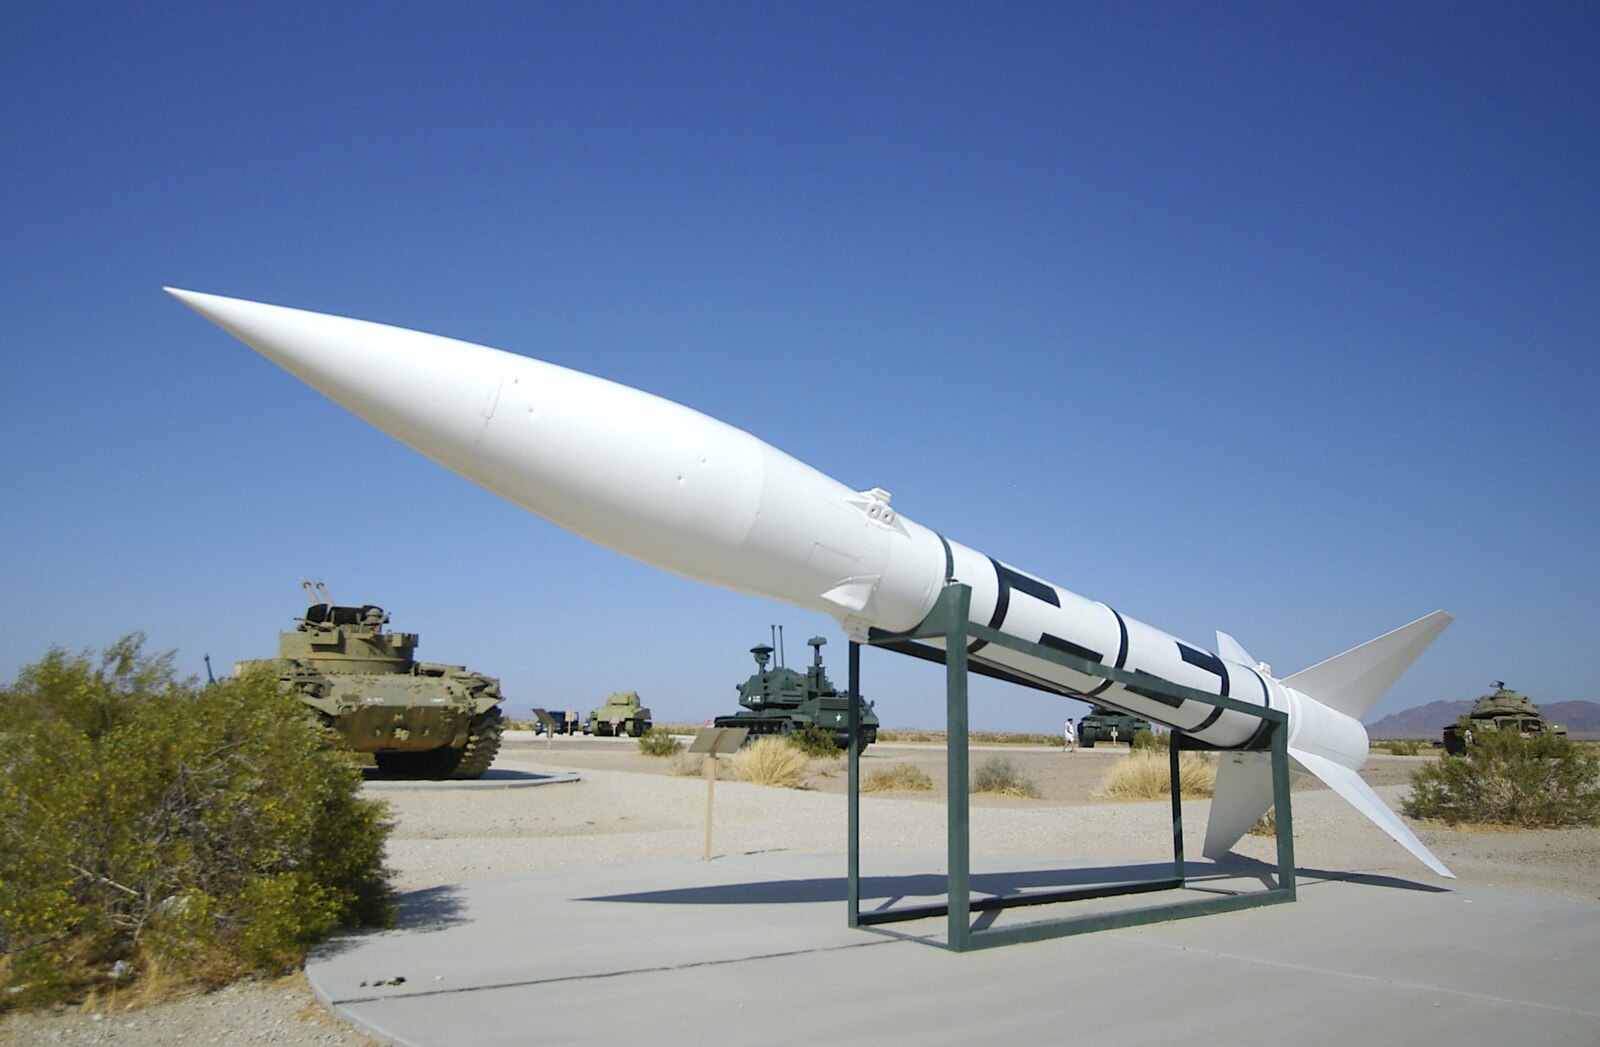 A missile of some sort at Yuma, Arizona from San Diego Seven: The Desert and the Dunes, Arizona and California, US - 22nd April